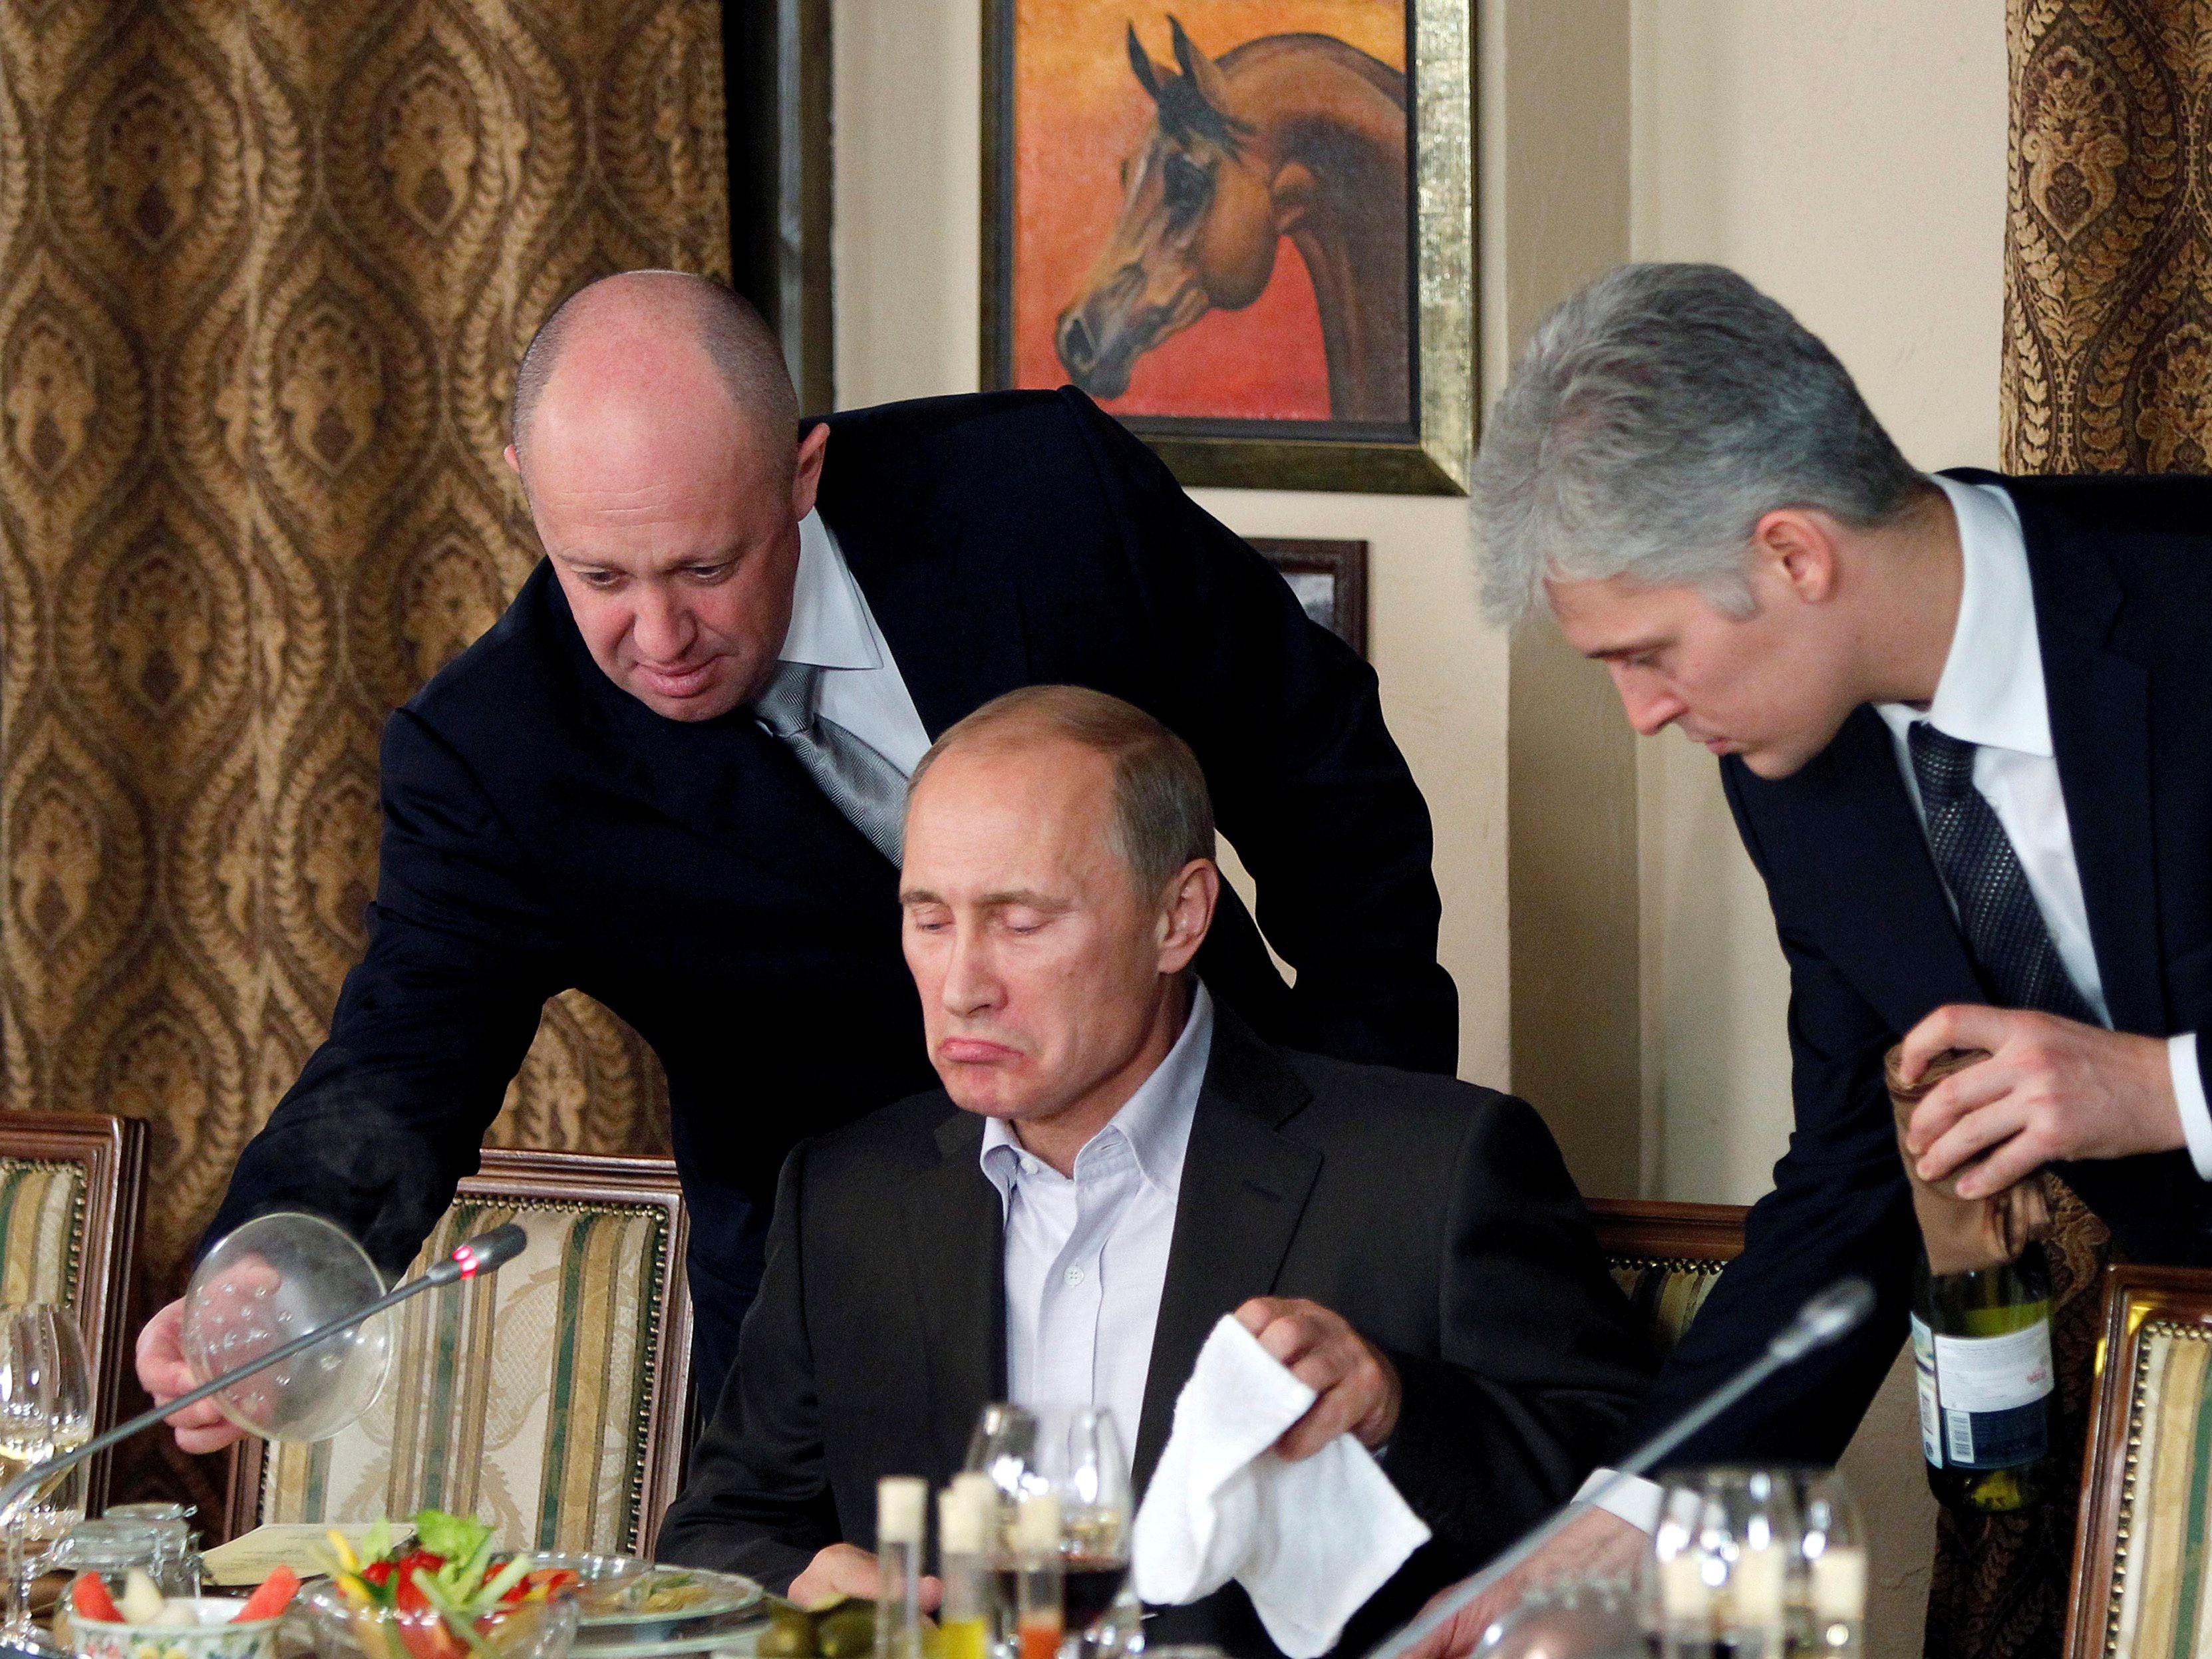 Prigozhin (L) assists Russian Prime Minister Vladimir Putin during a dinner with foreign scholars